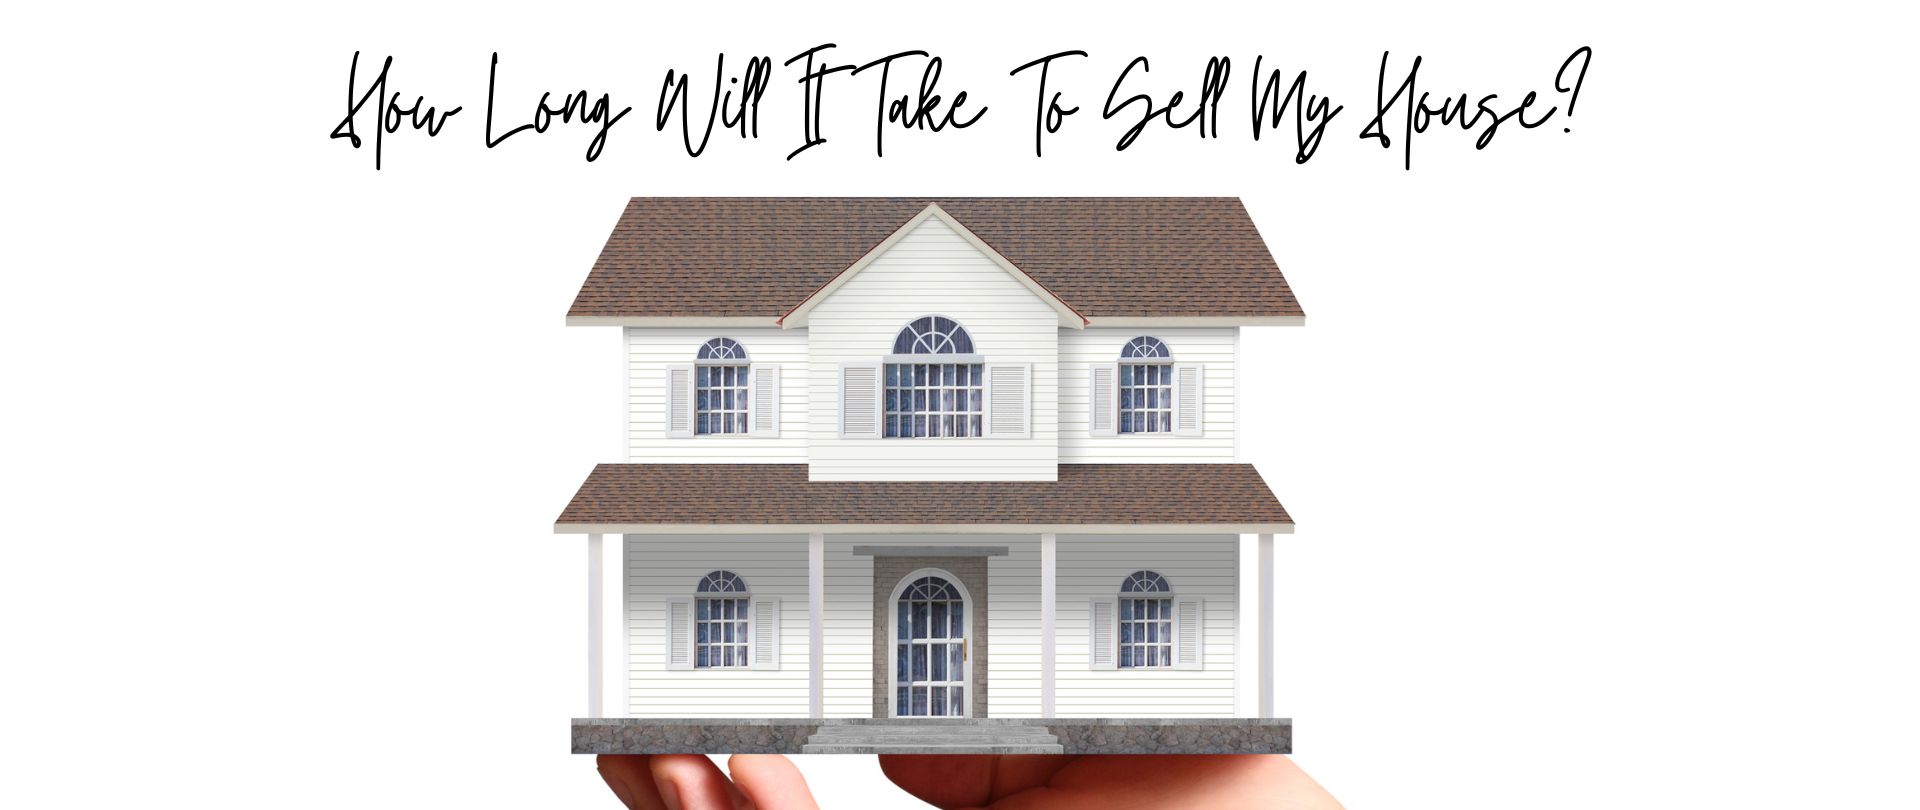 How Long Will It Take To Sell My House?